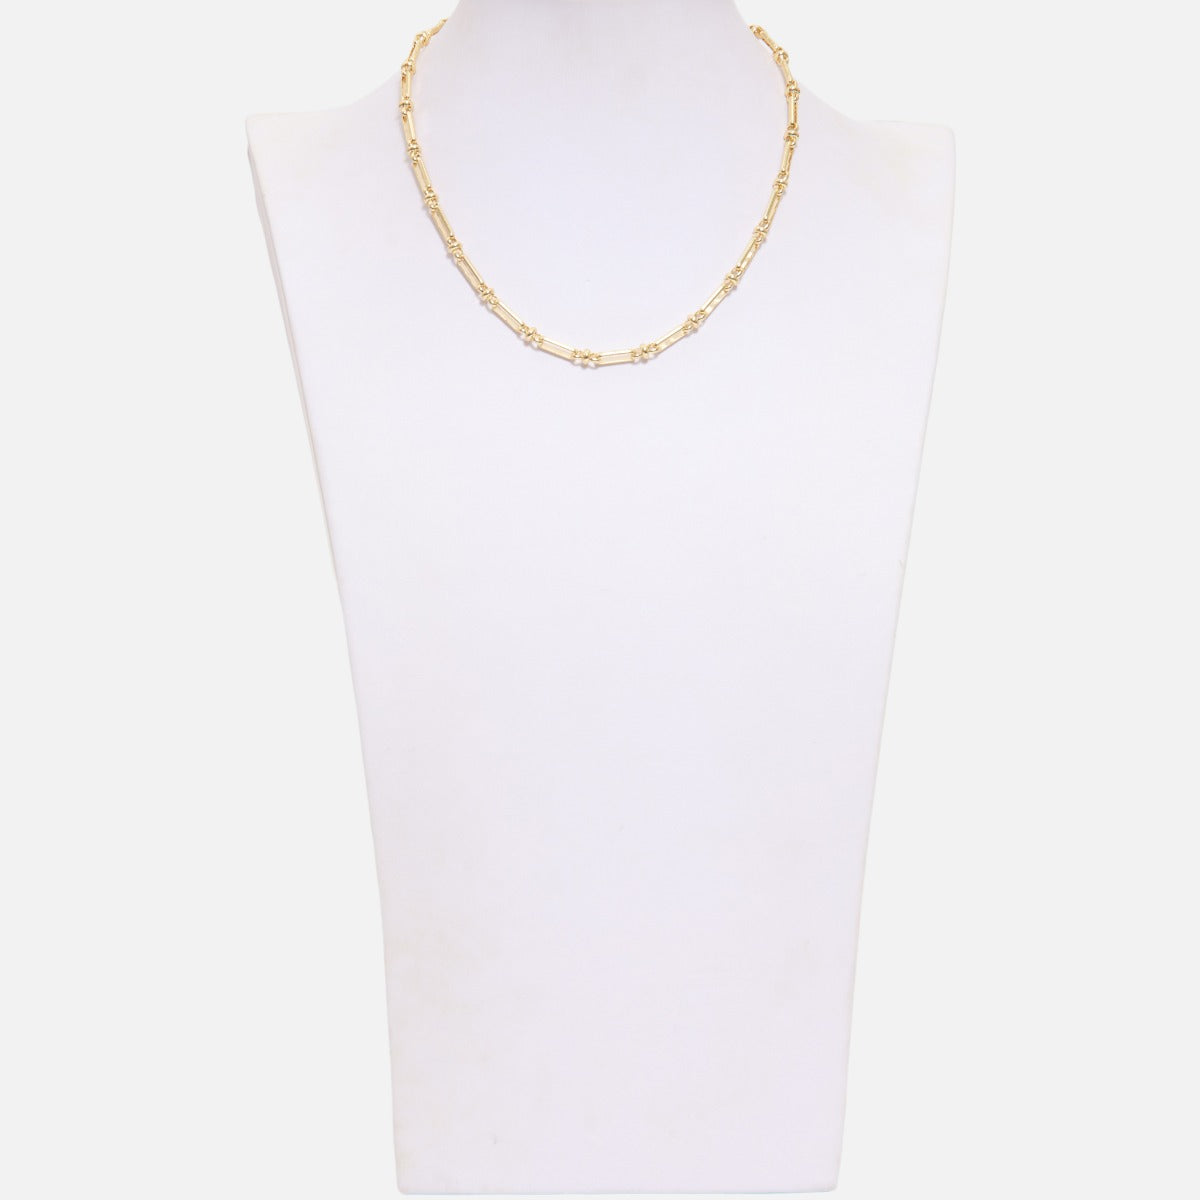 Thick gold chain necklace